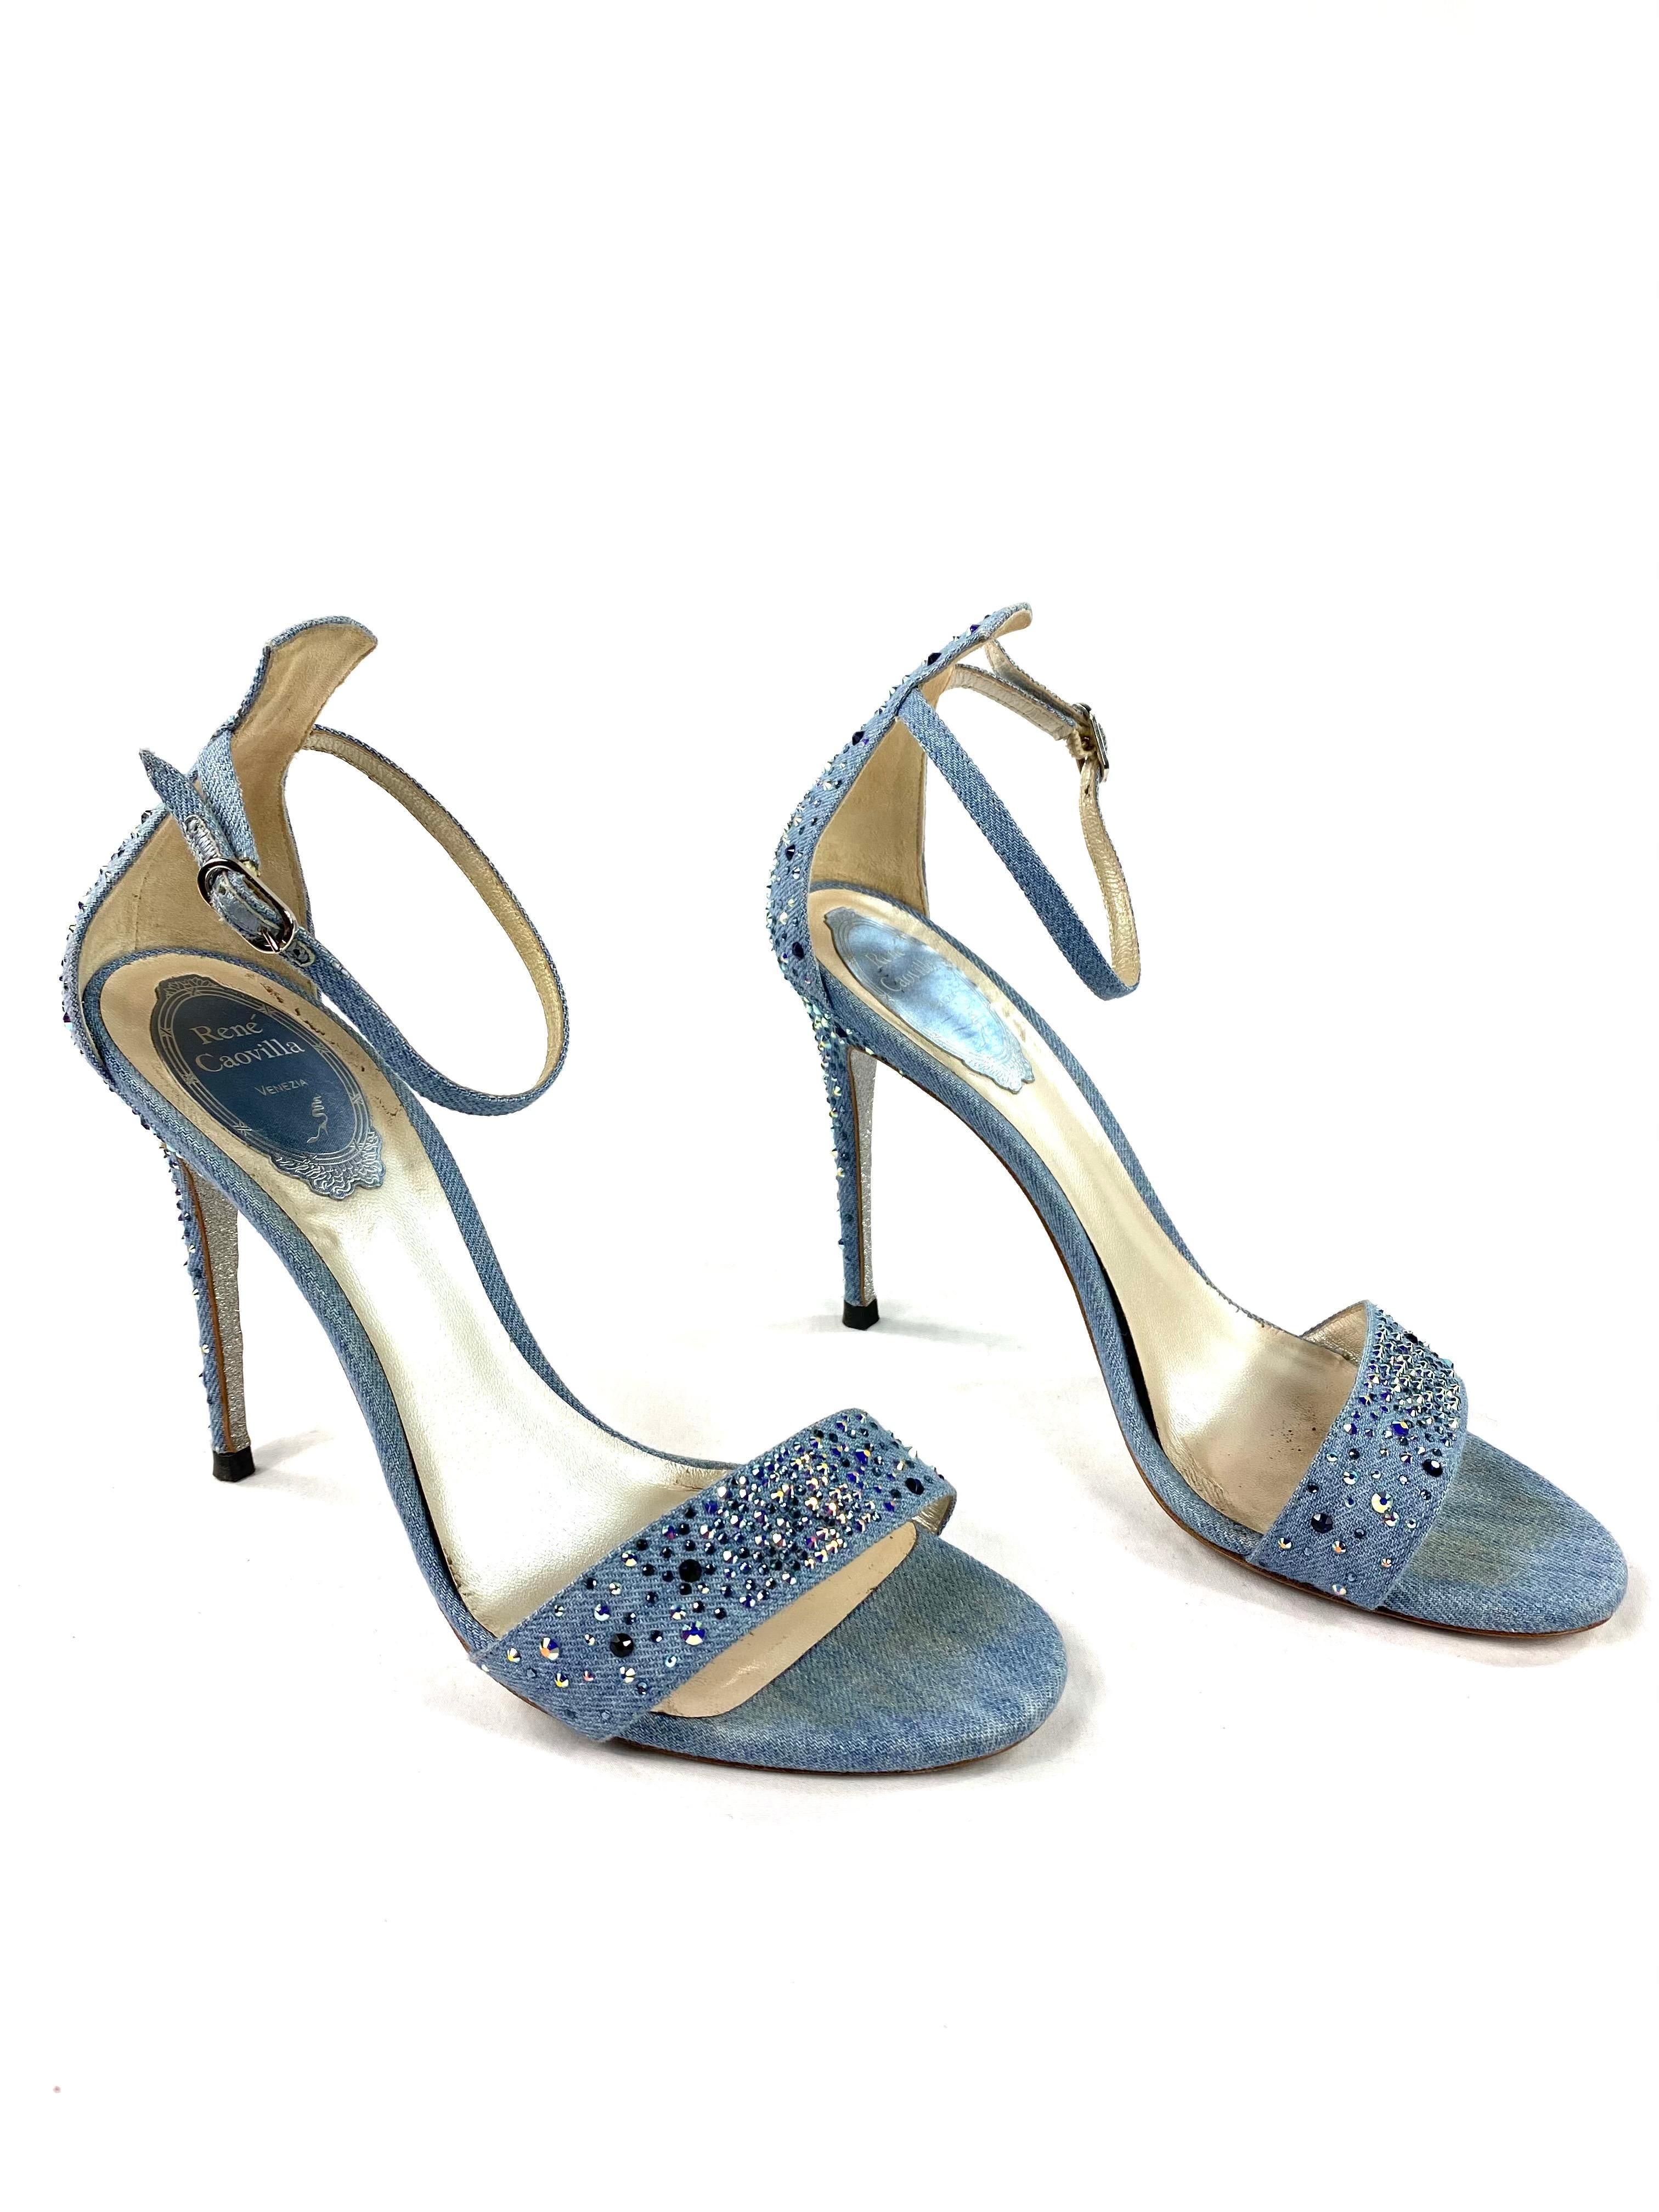 Product details:

Light blue wash denim with multiple shades of blue Swarovski crystals, strappy styled sandals with heel height 4.25